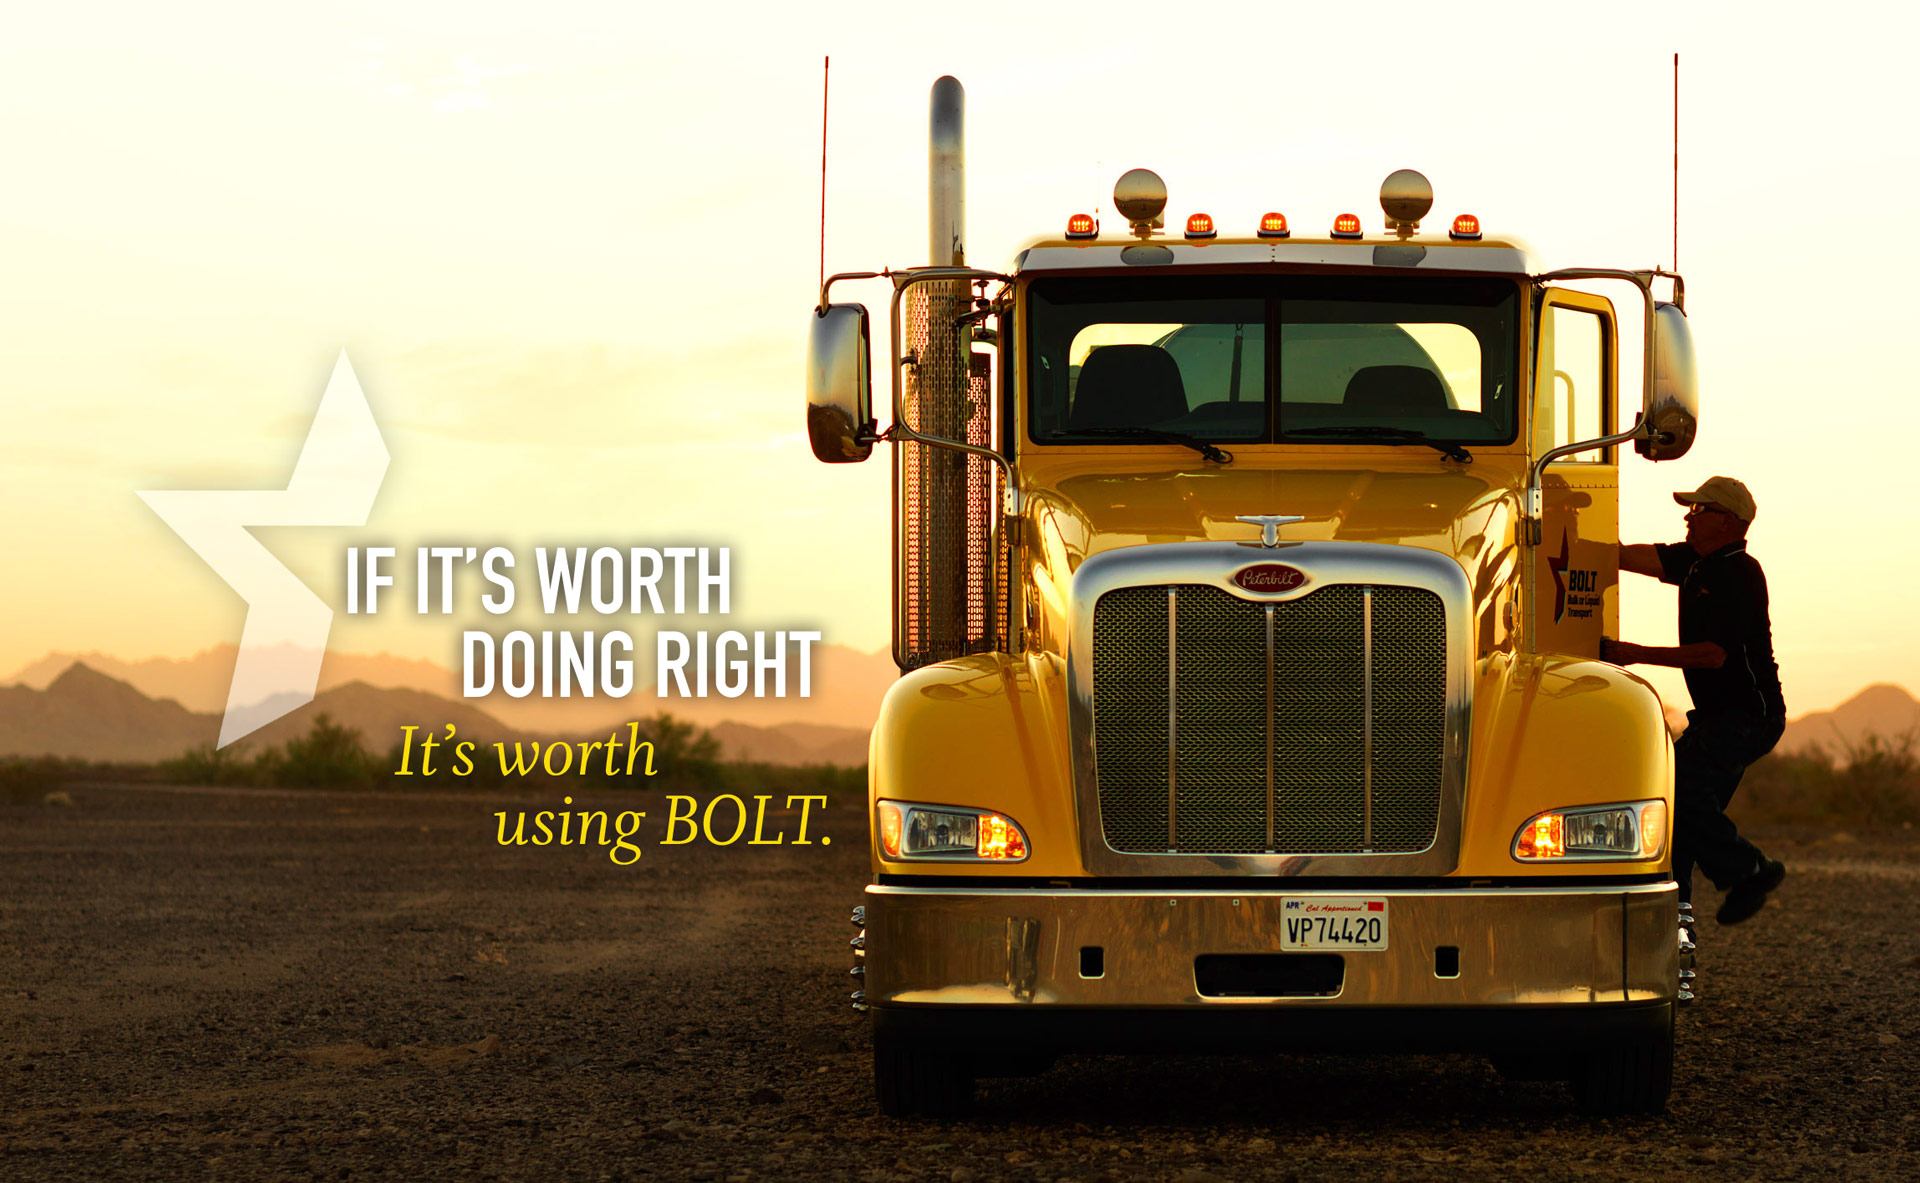 BOLT- Bulk or Liquid Transport - Yellow Truck with text overlay "If it's worth doing right. It's worth using BOLT"